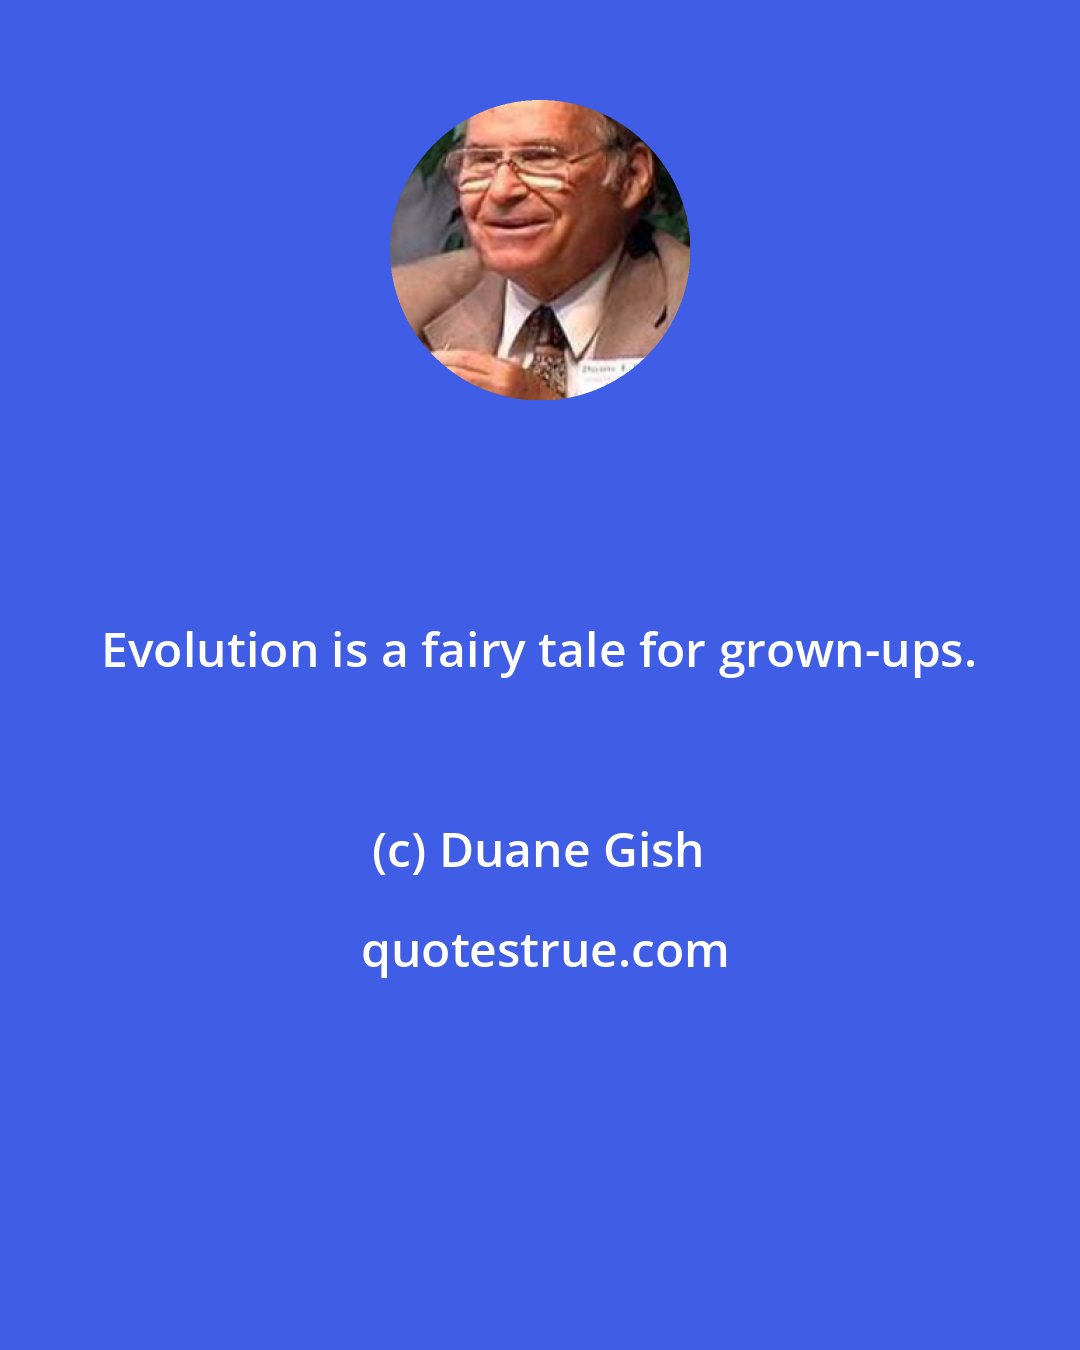 Duane Gish: Evolution is a fairy tale for grown-ups.